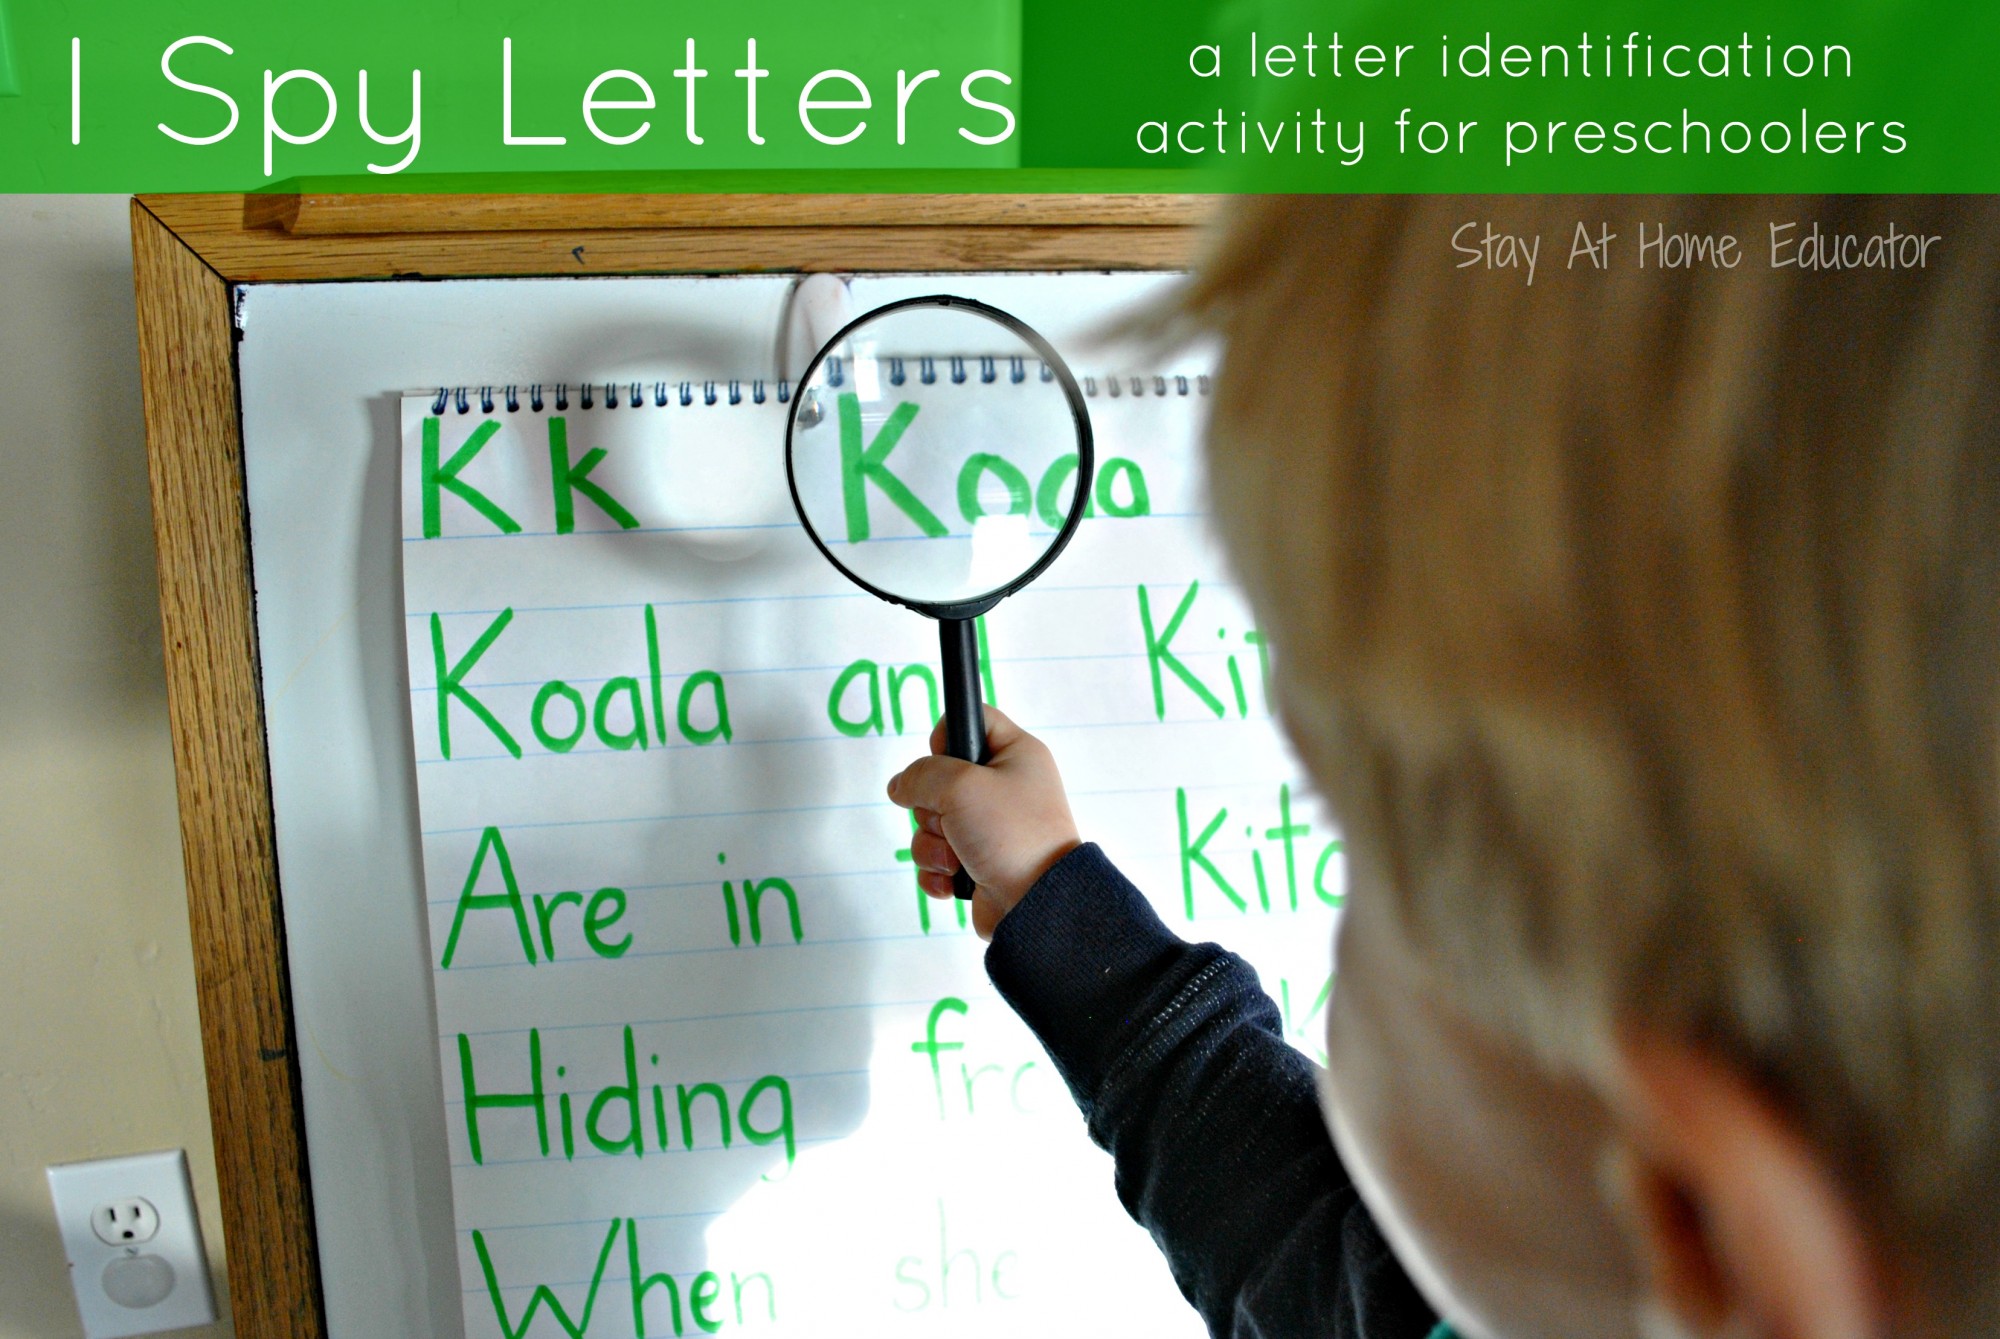 I spy letters, a letter identification activity for preschoolers - Stay At Home Educator